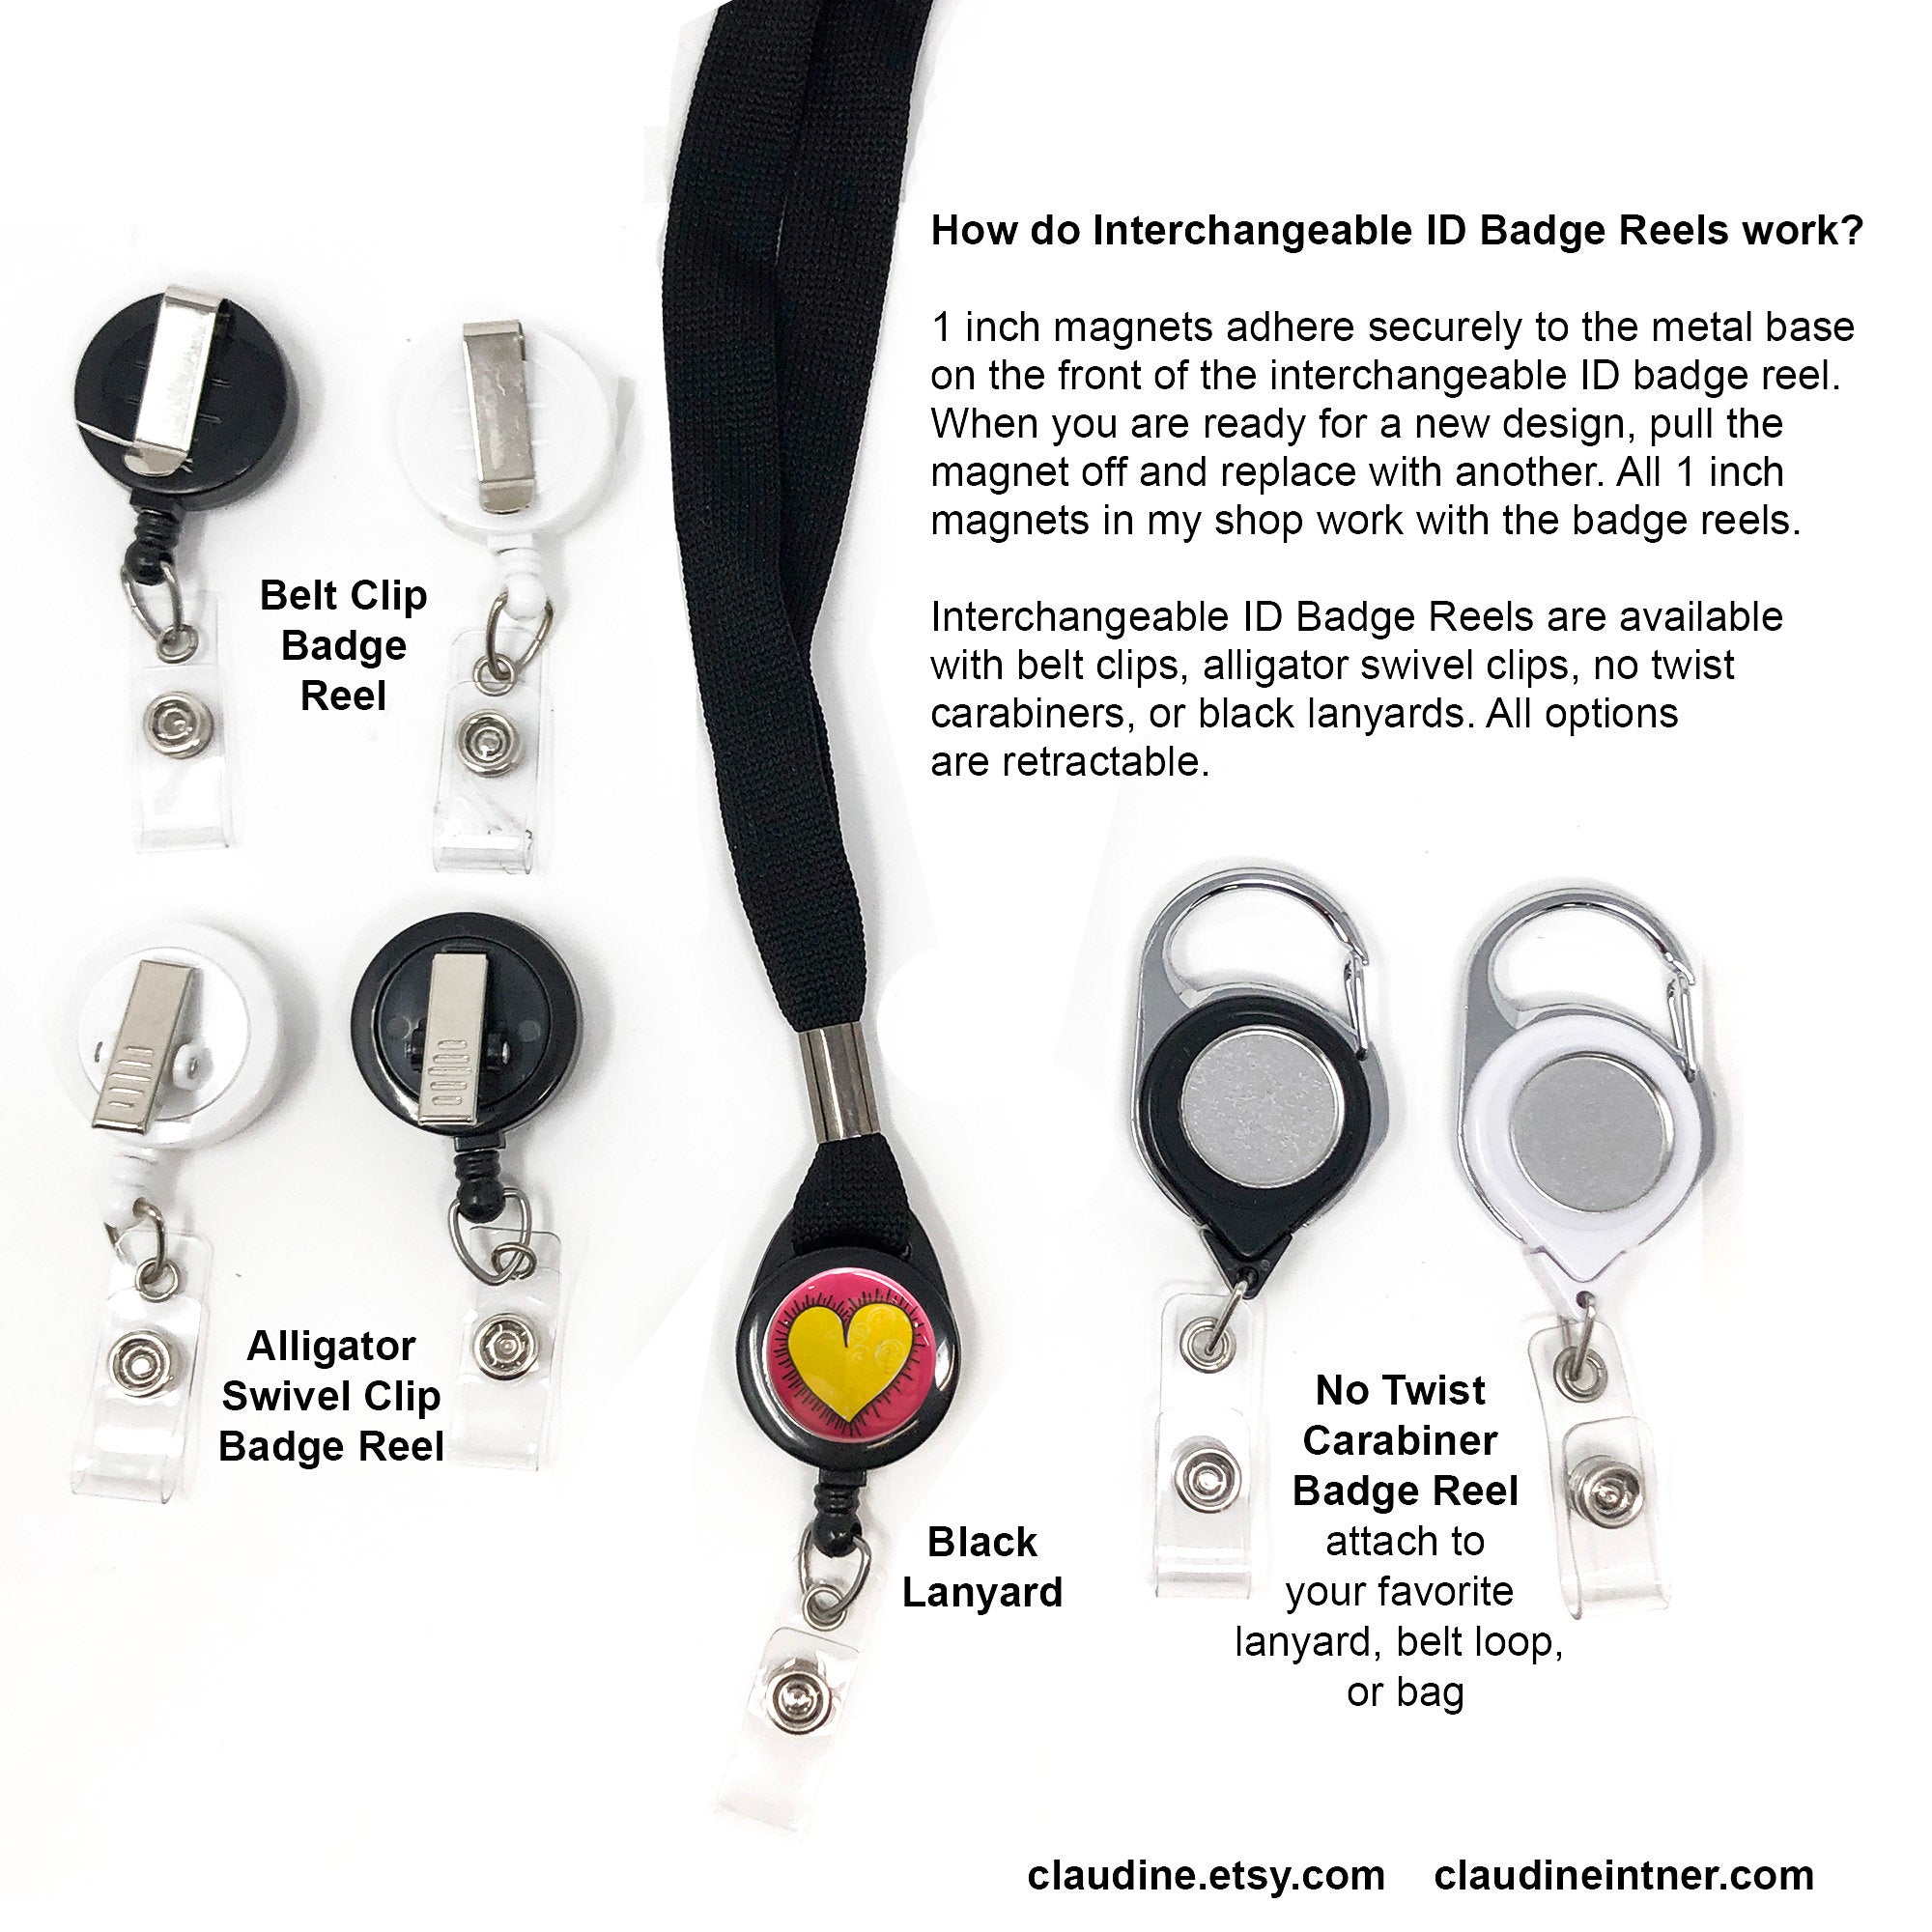 Interchangeable Badge Reel or ID Lanyard for Nurse, Teacher, Co-worker Gift - Magnetic ID Badge Holder with 6 Different Magnet Designs Black Carabiner